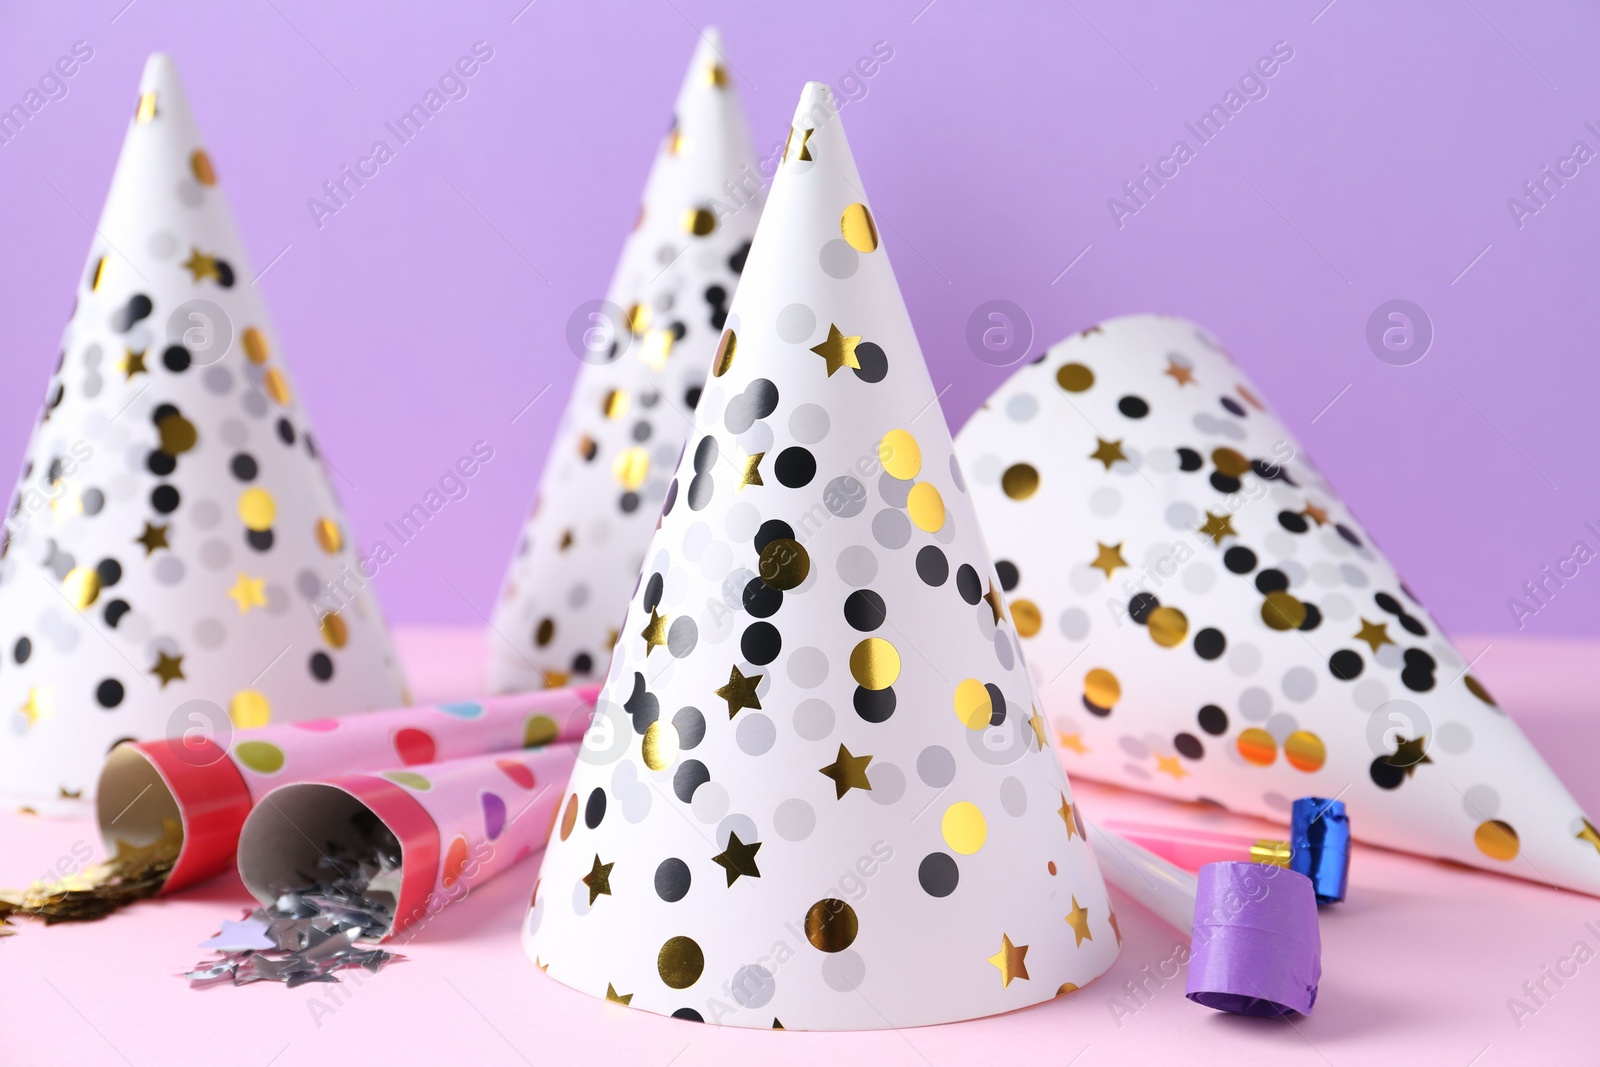 Photo of Party hats, confetti and blowers on color background